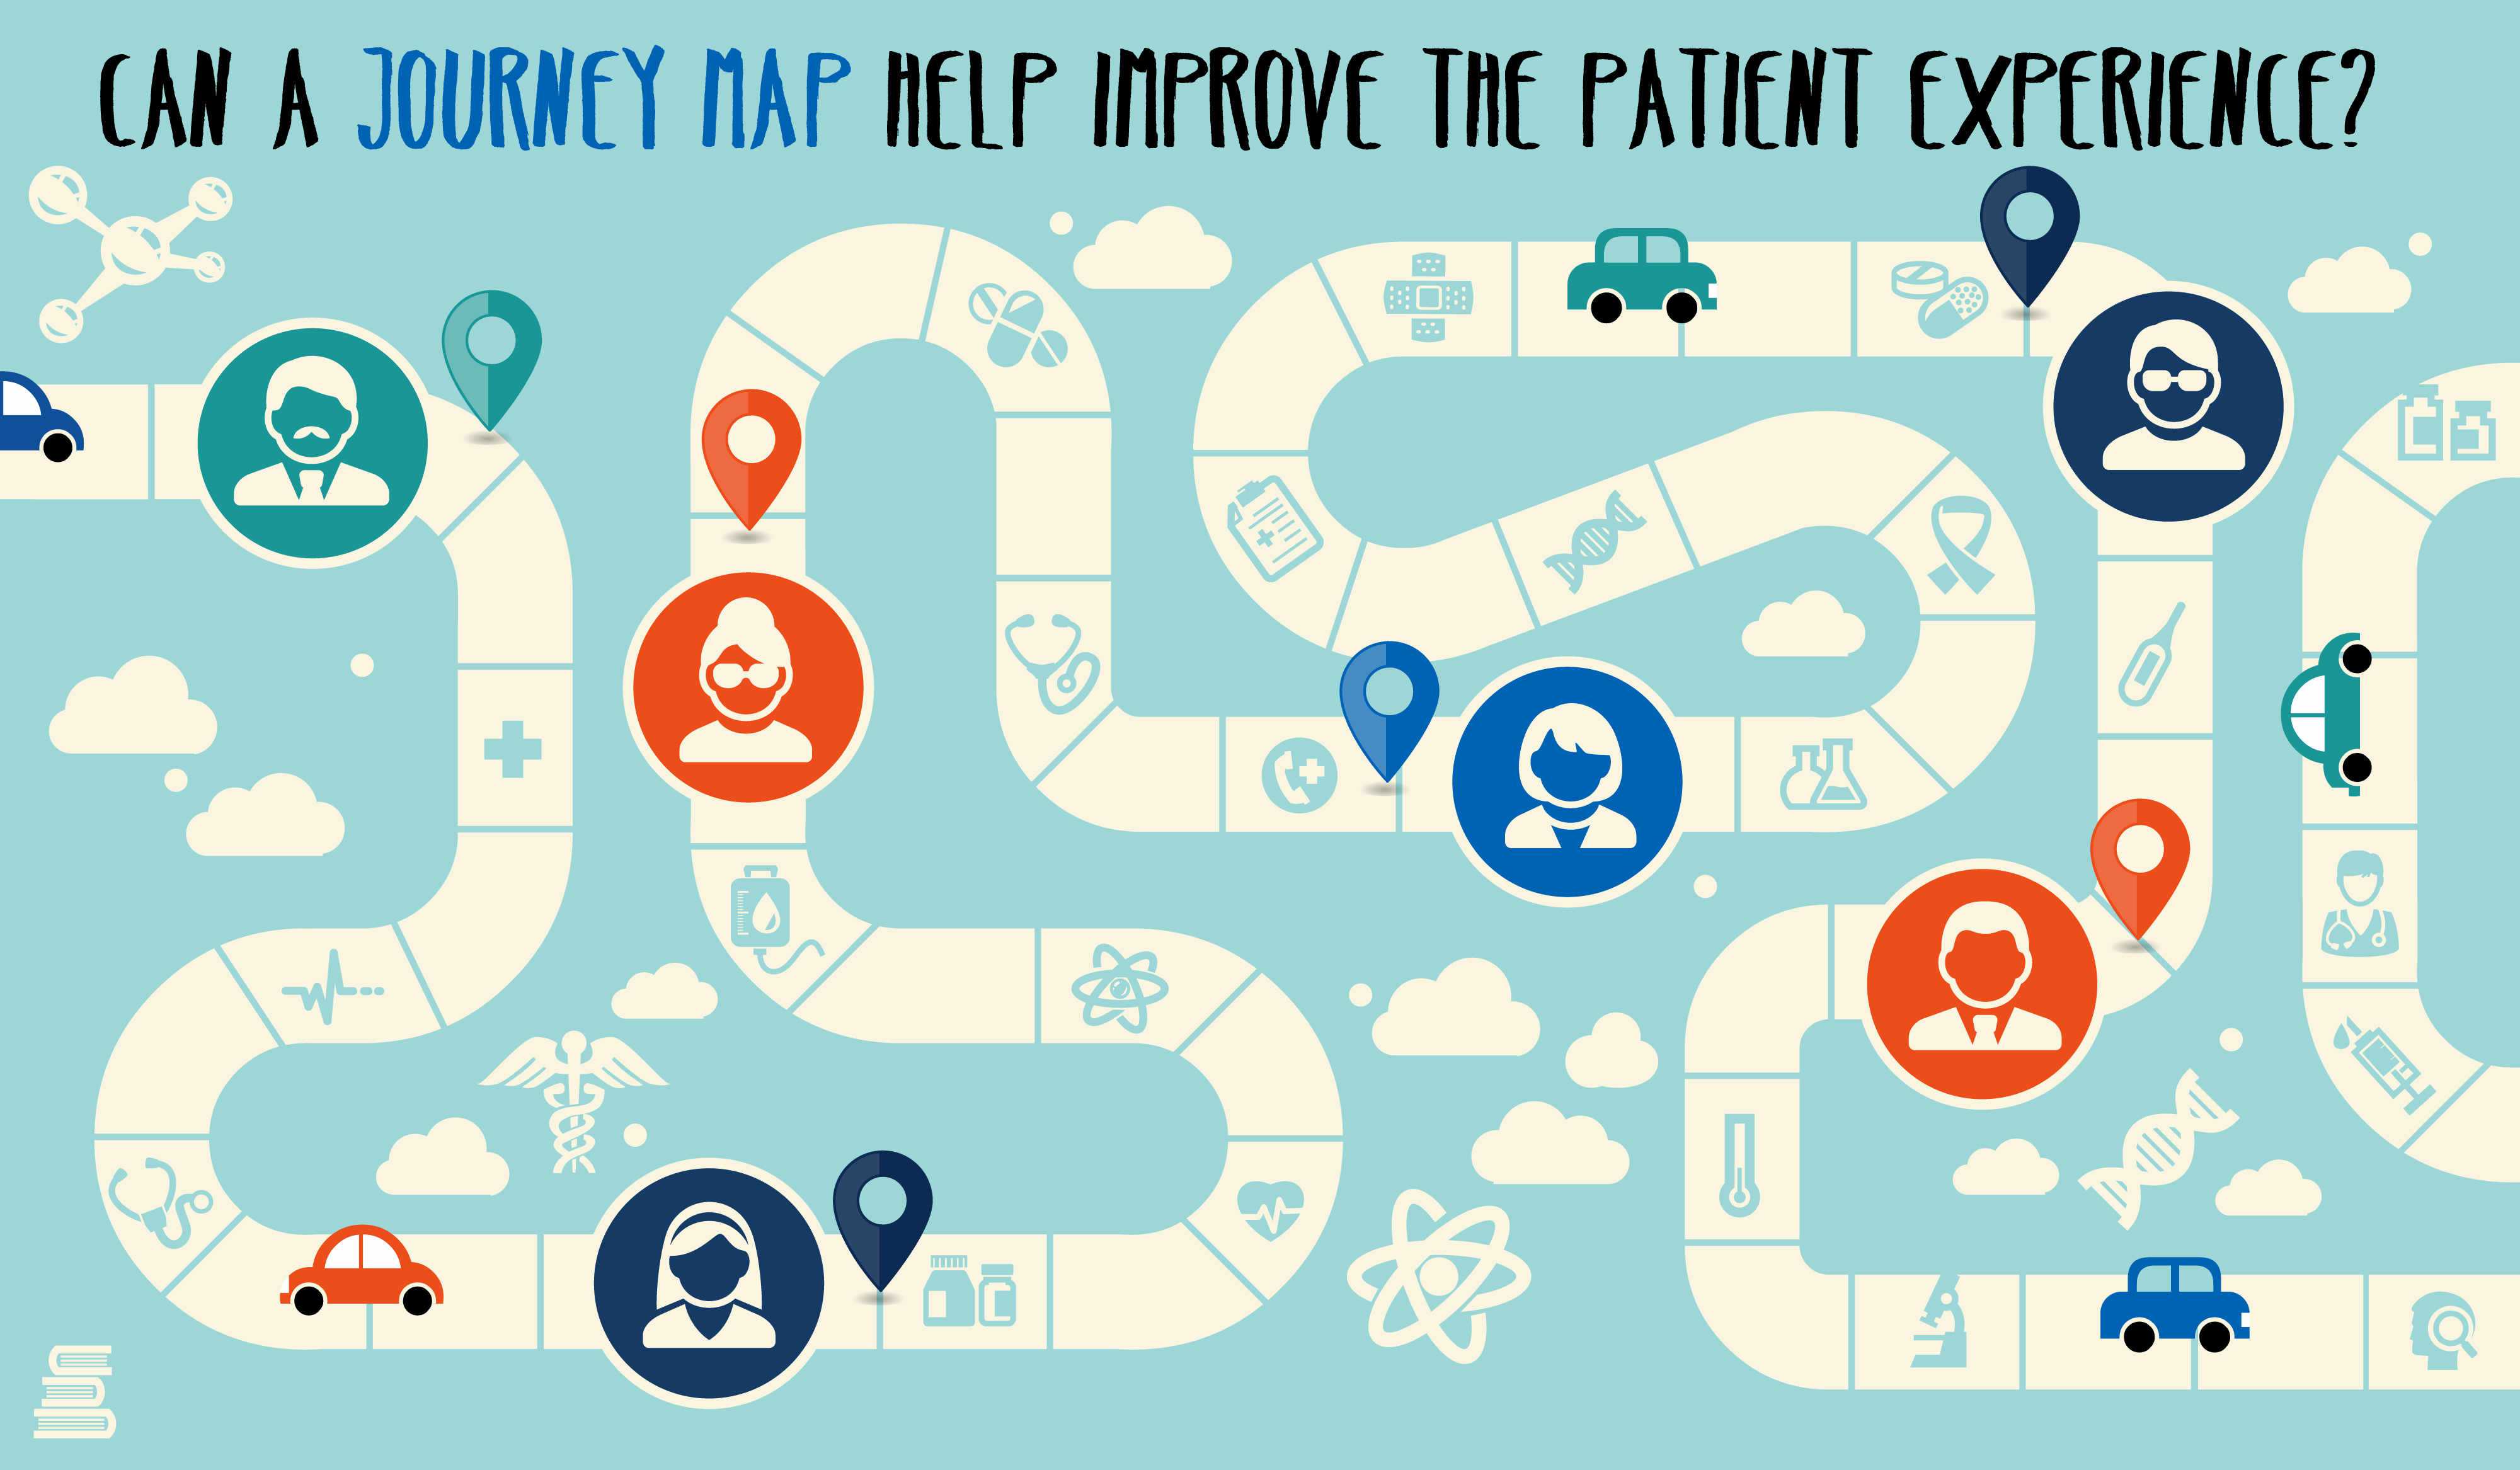 Can a Journey Map Help Improve the Patient Experience?